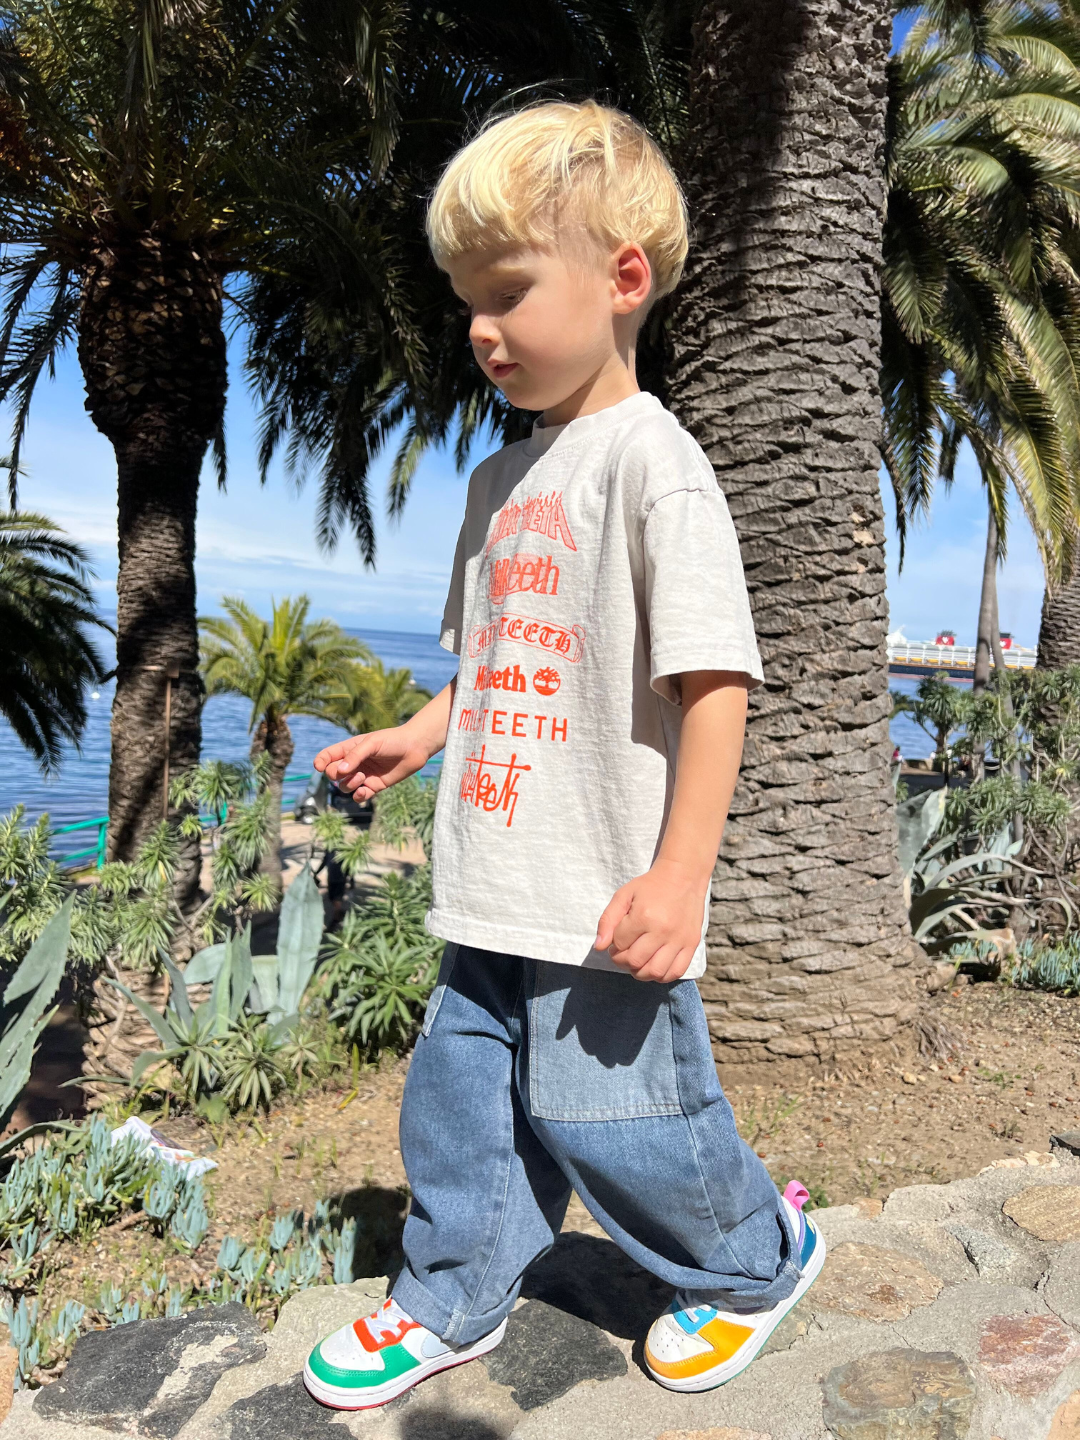 A child wearing the Cease and Desist tee in cement, with baggy jeans in medium blue denim with lighter blue patch pockets. They have short blond hai. The light grey tshirt has orange Milk teeth lettering, and he also wears white sneakers with colorful trim, walking on a stone wall with palm trees, the ocean and blue sky in the background.